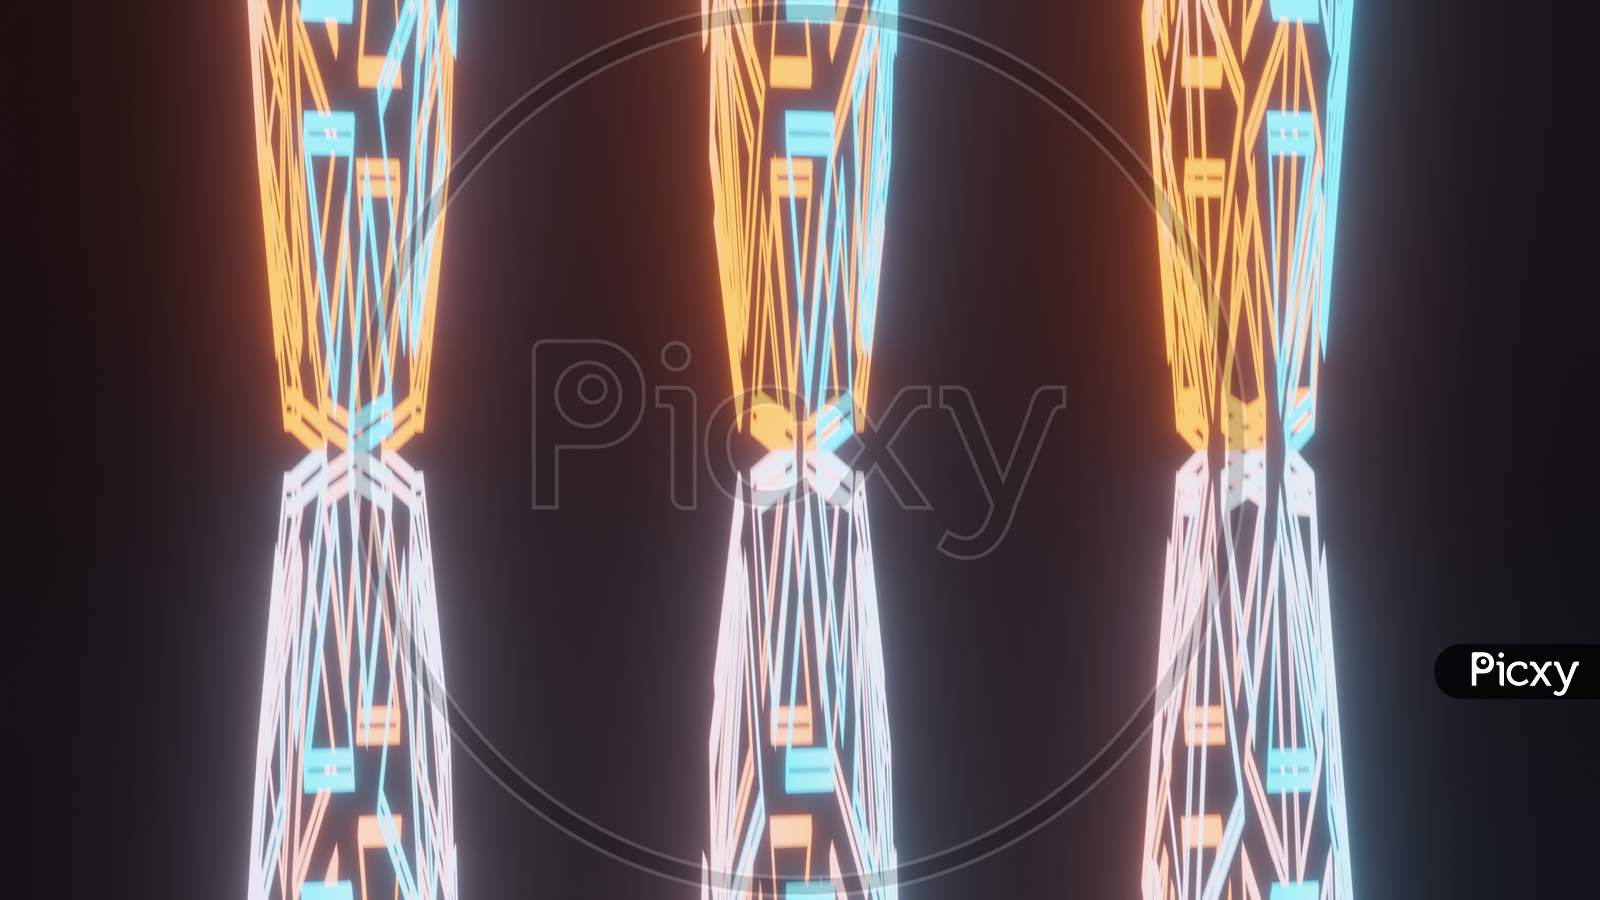 3D Illustration Graphic Of Three Colorful Abstract Sci-Fi Objects Moving In A Straight Line.